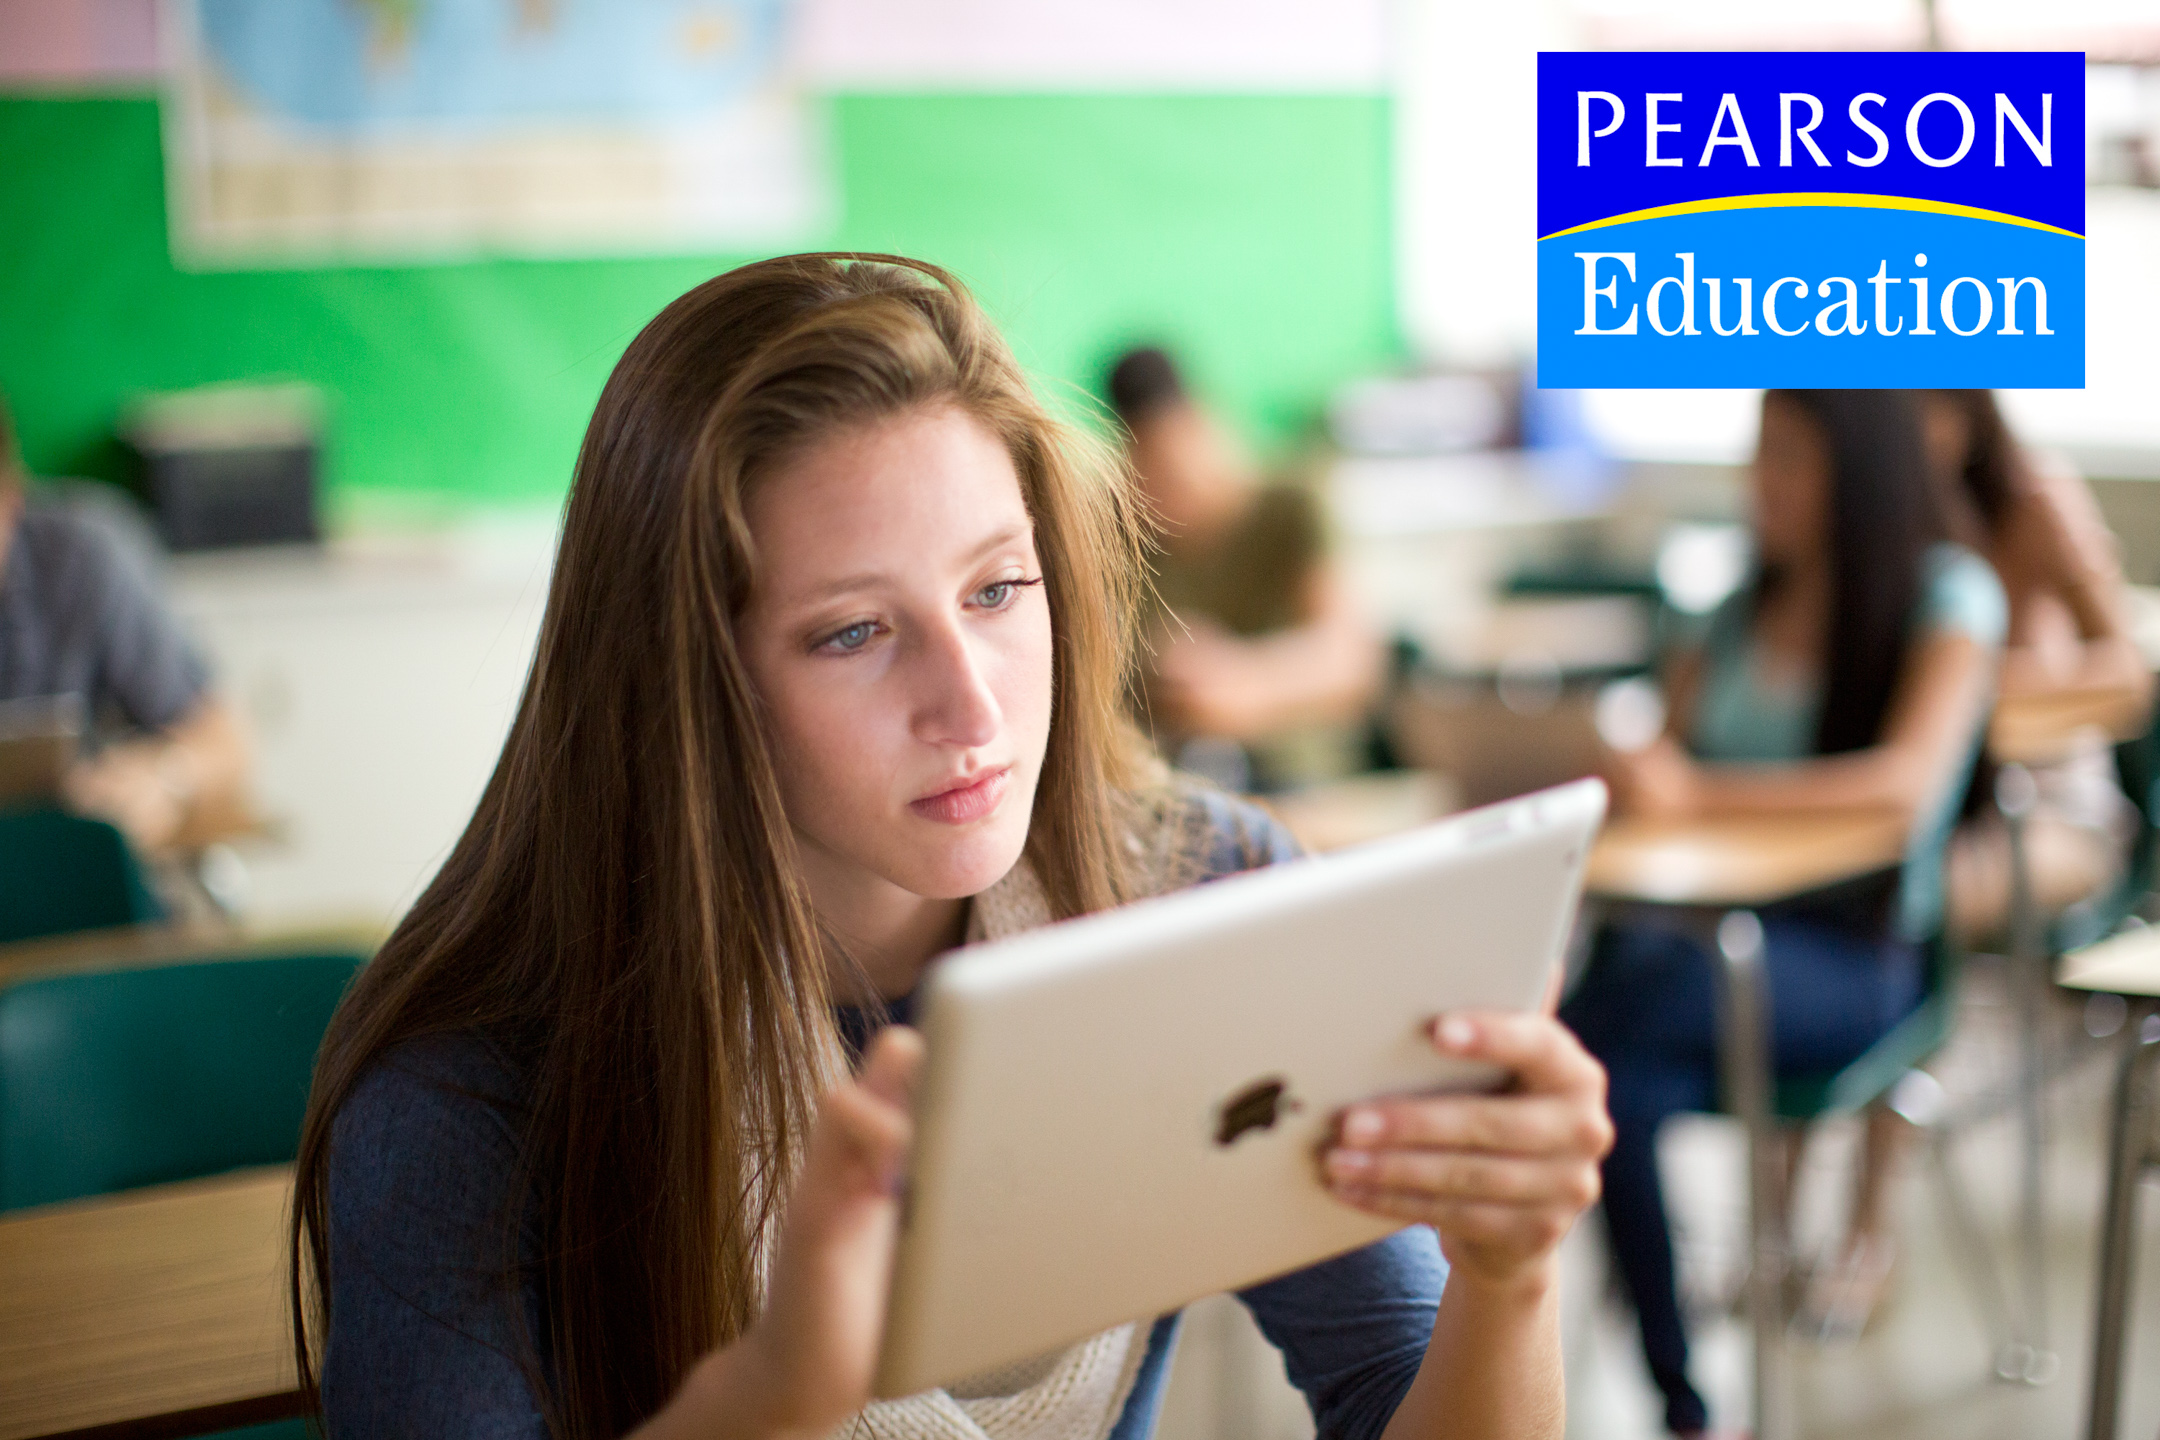 A teen girl works on an iPad in a classroom in an Ad Campaign for Pearson Education photographed by Lifestyle Photographer Diana Mulvihill